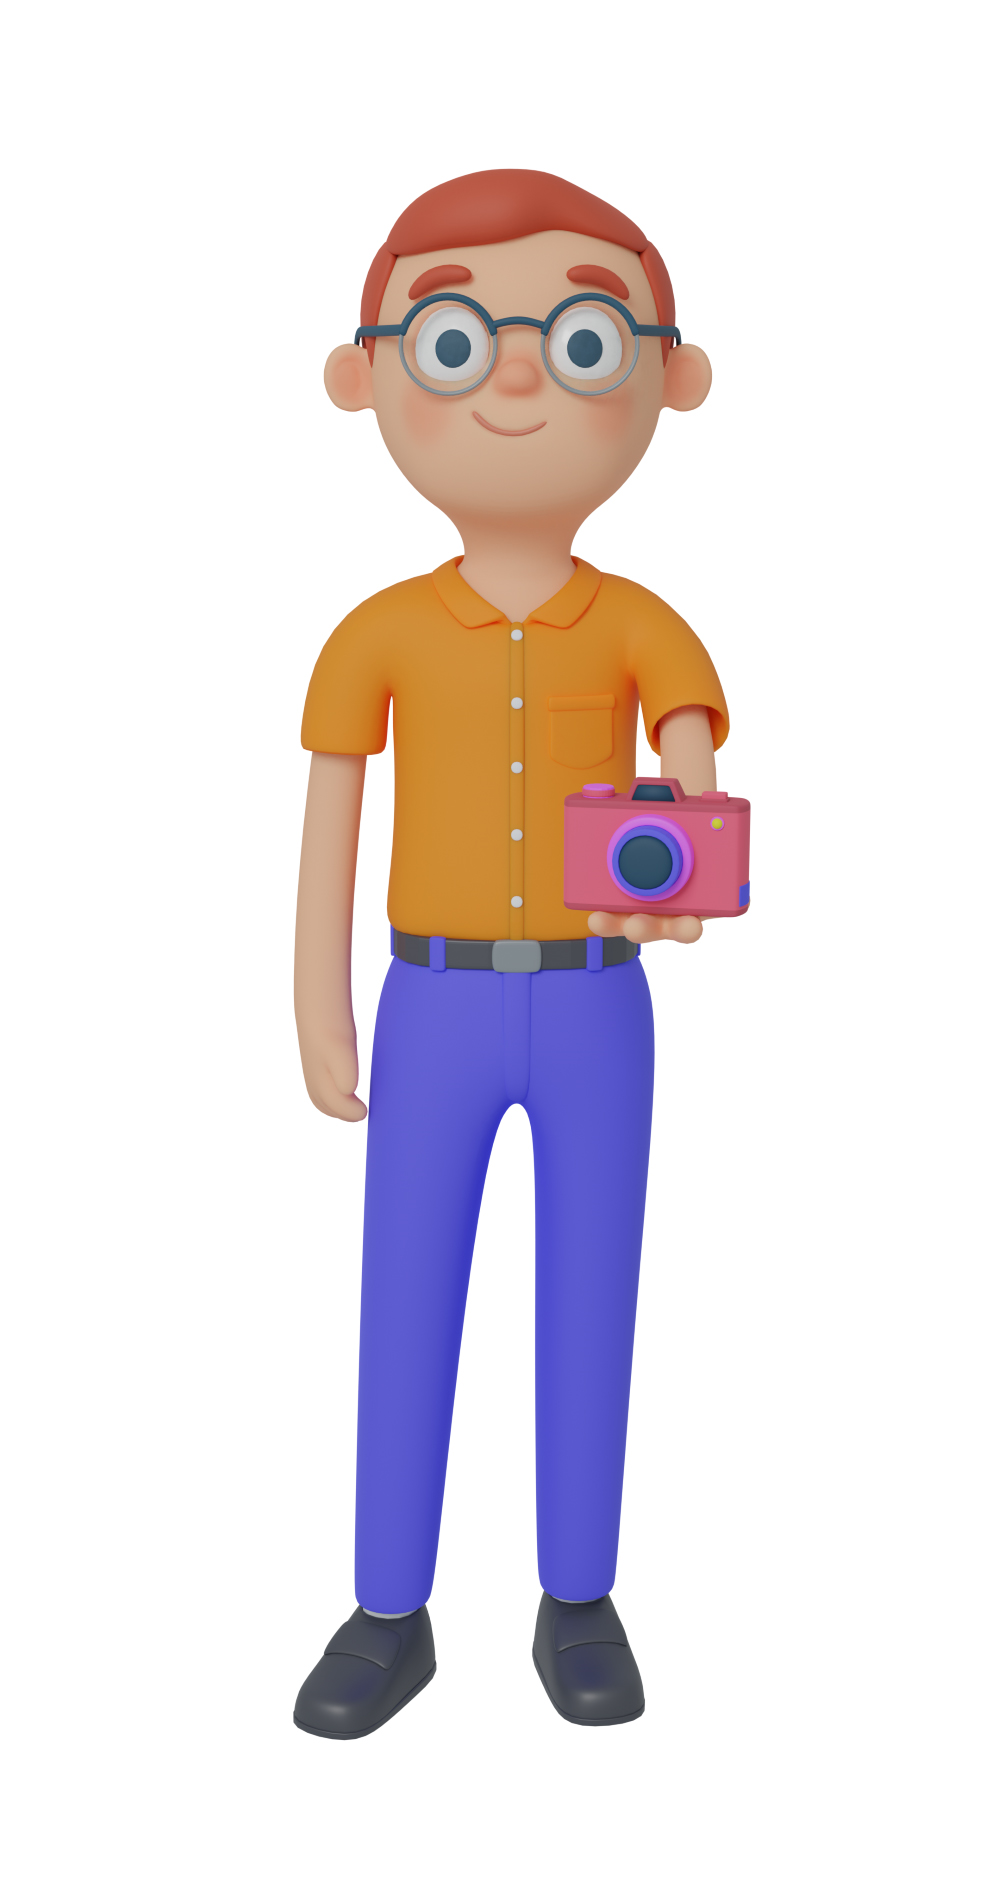 3d character design of a man standing up with a camera on hiw hand